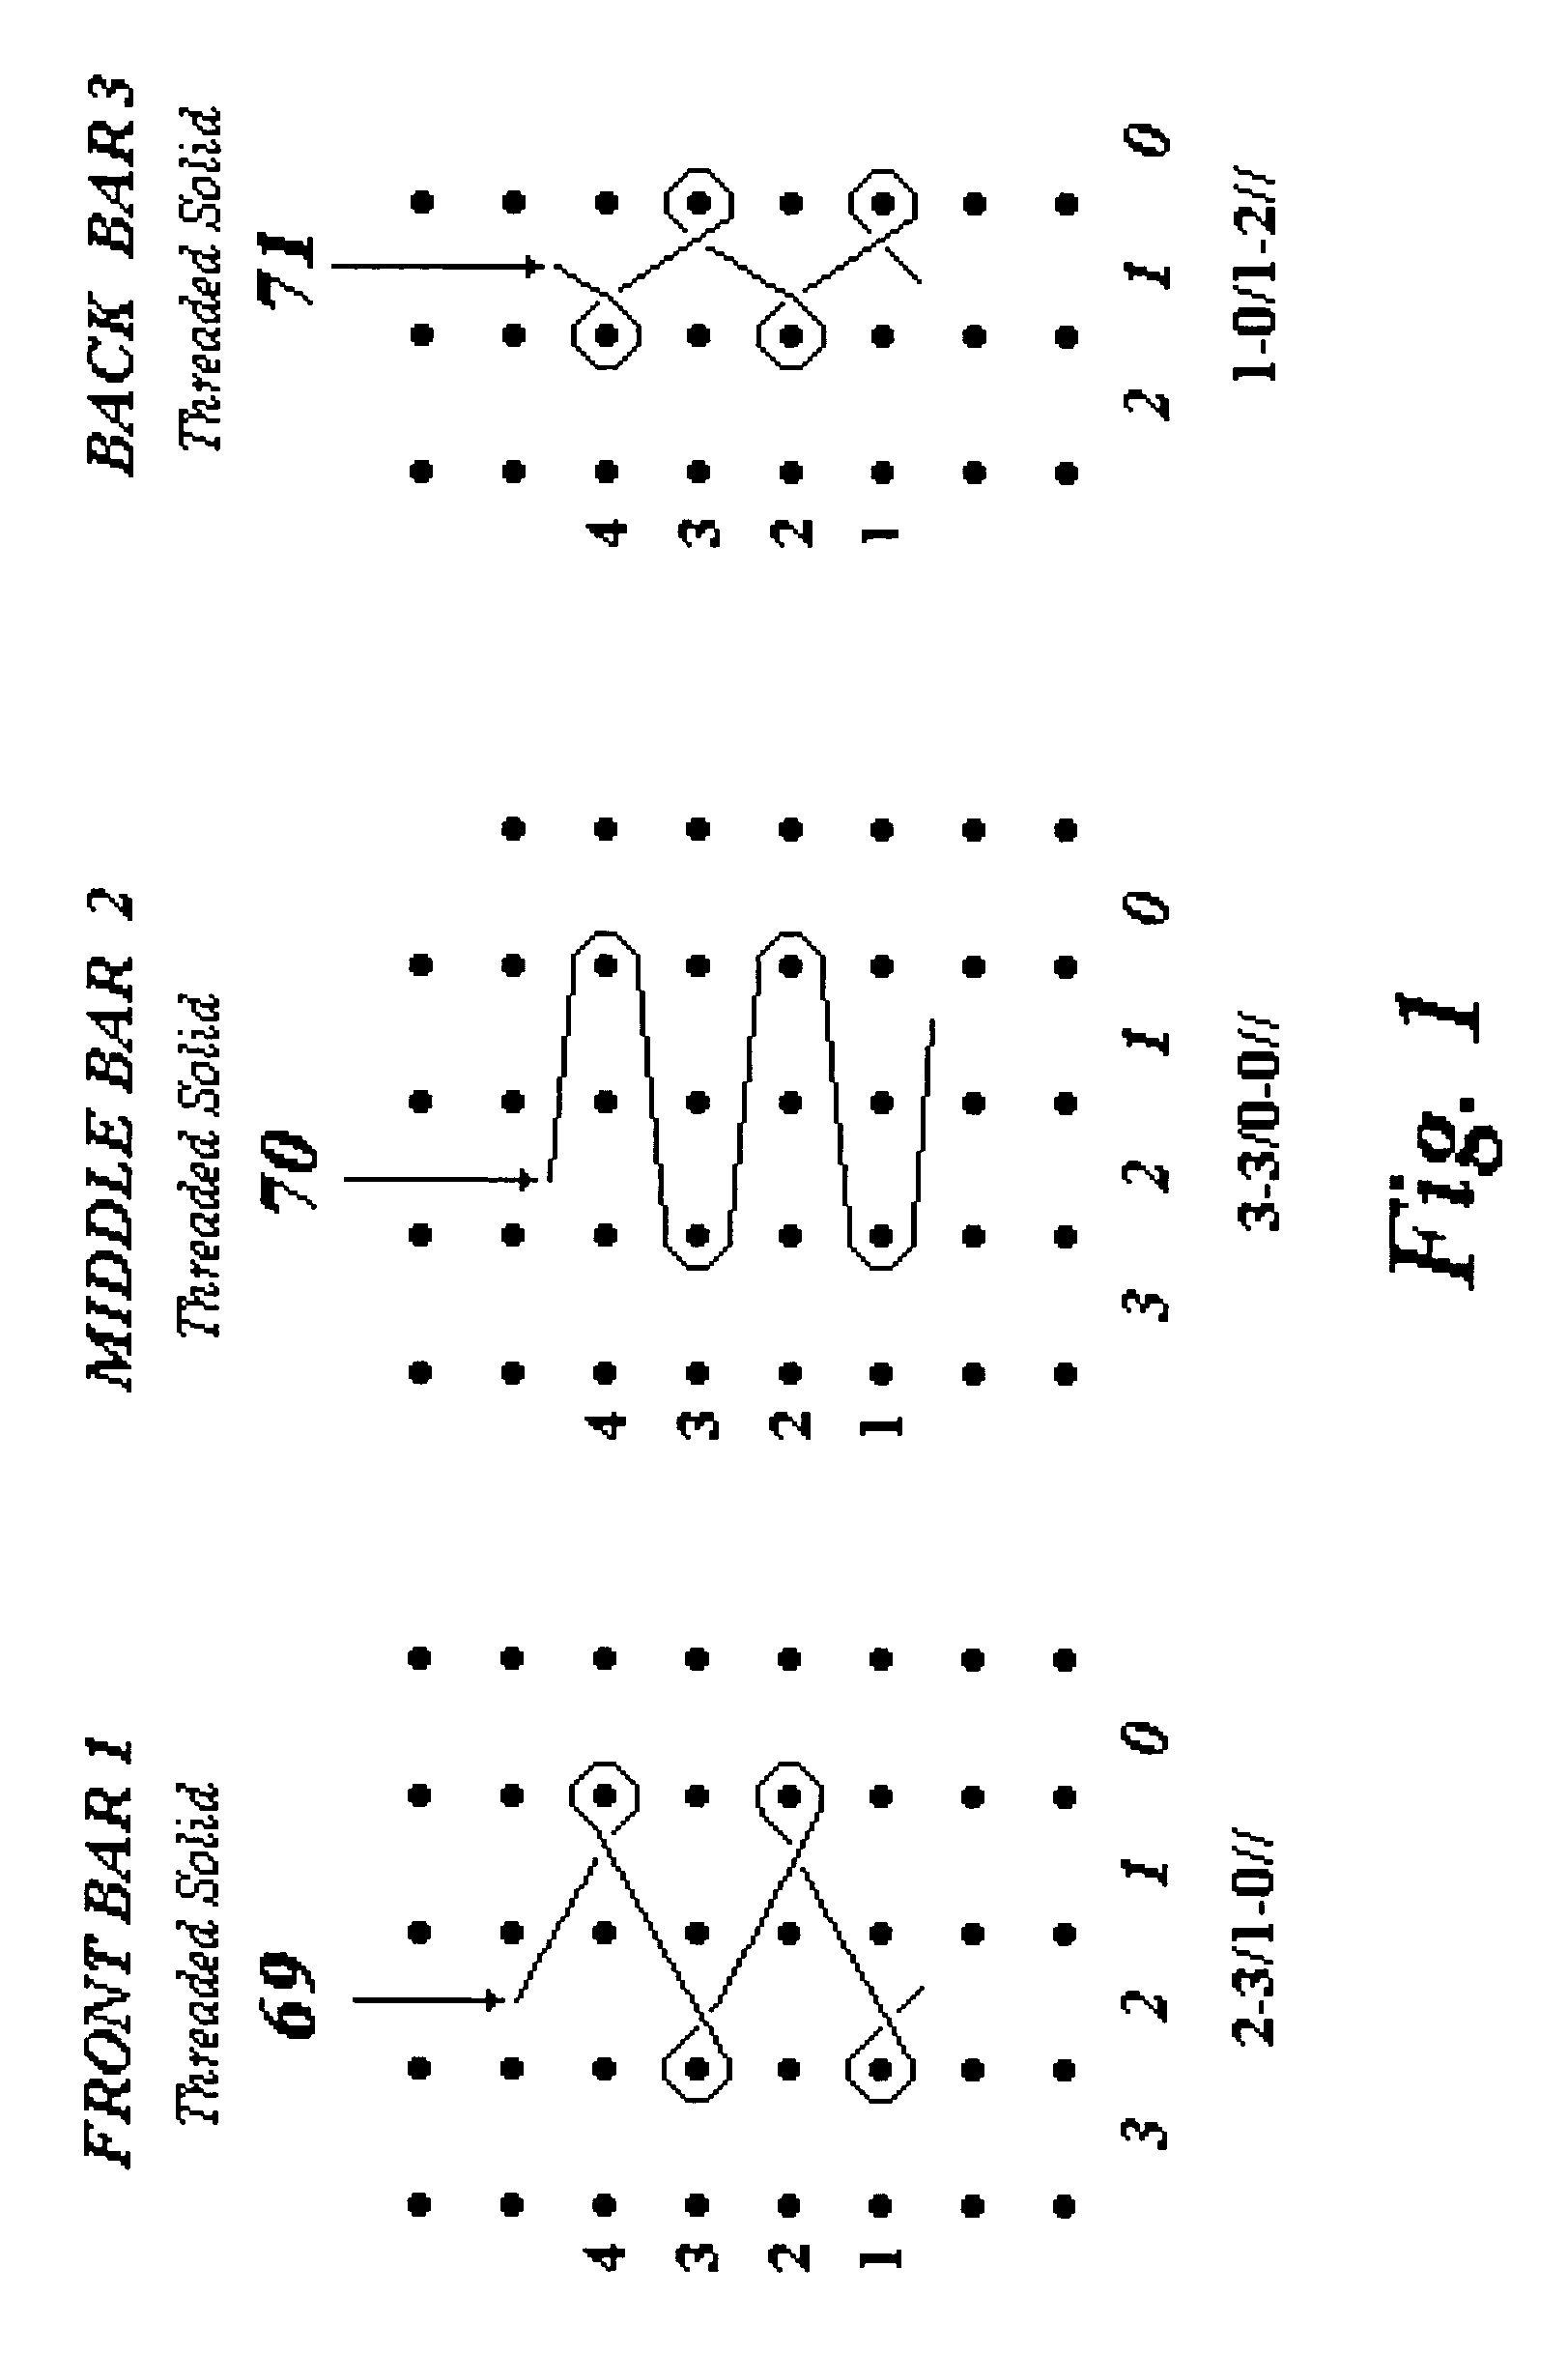 Functional double-faced performance warp knit fabric, method of manufacturing, and products made there from